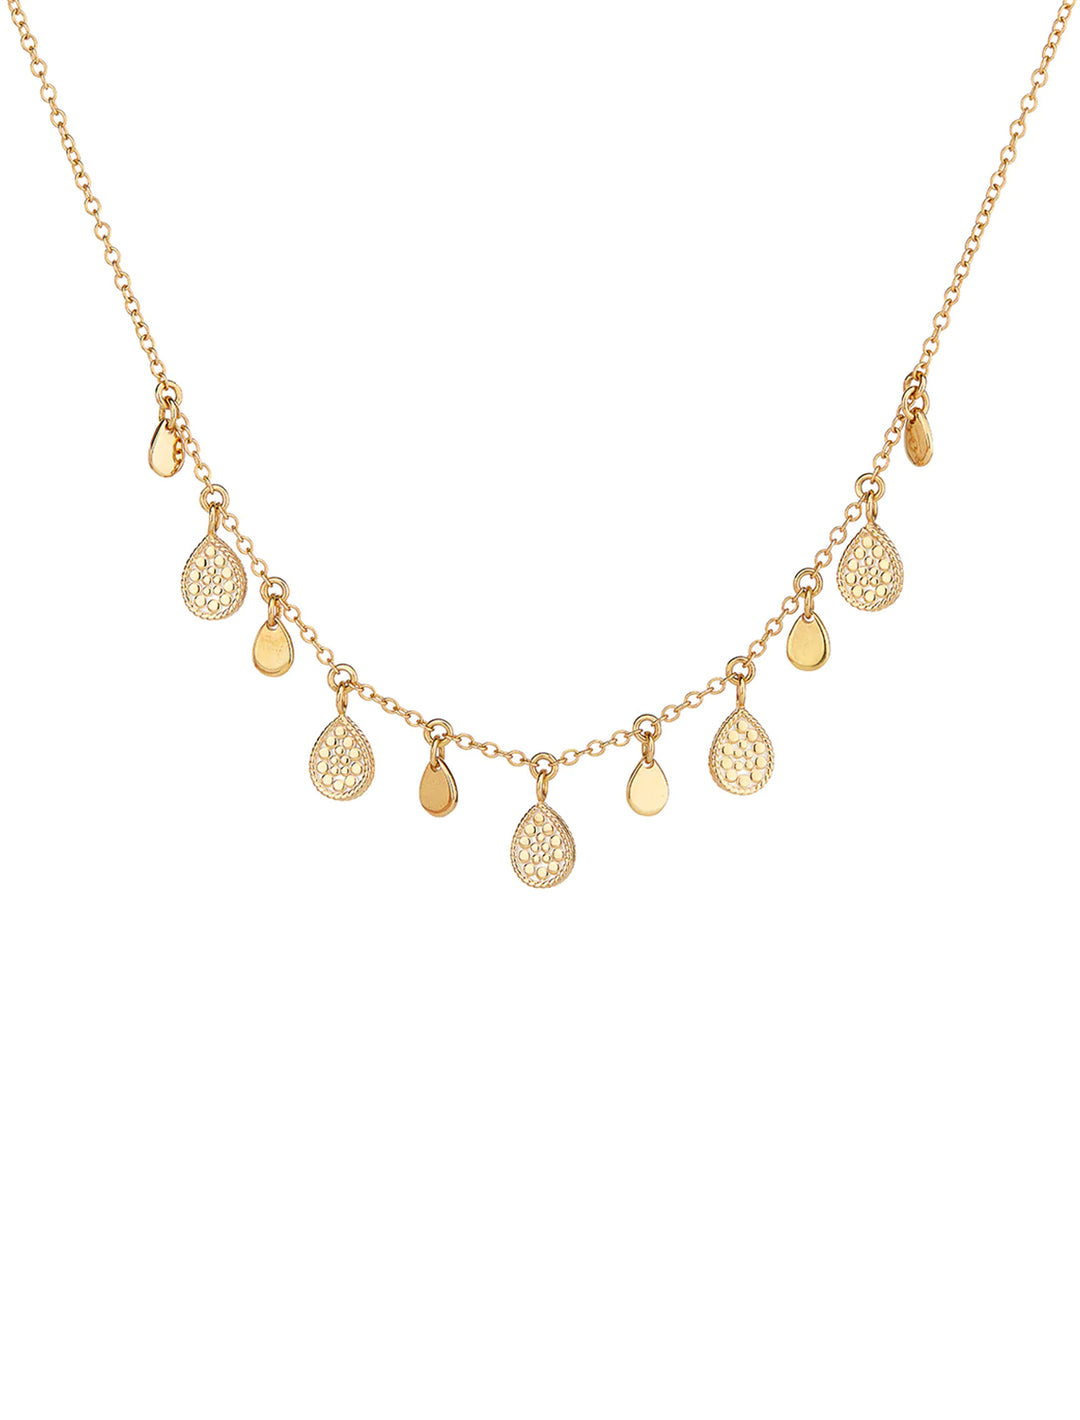 Front view of Anna Beck's teardrop charm necklace in gold.